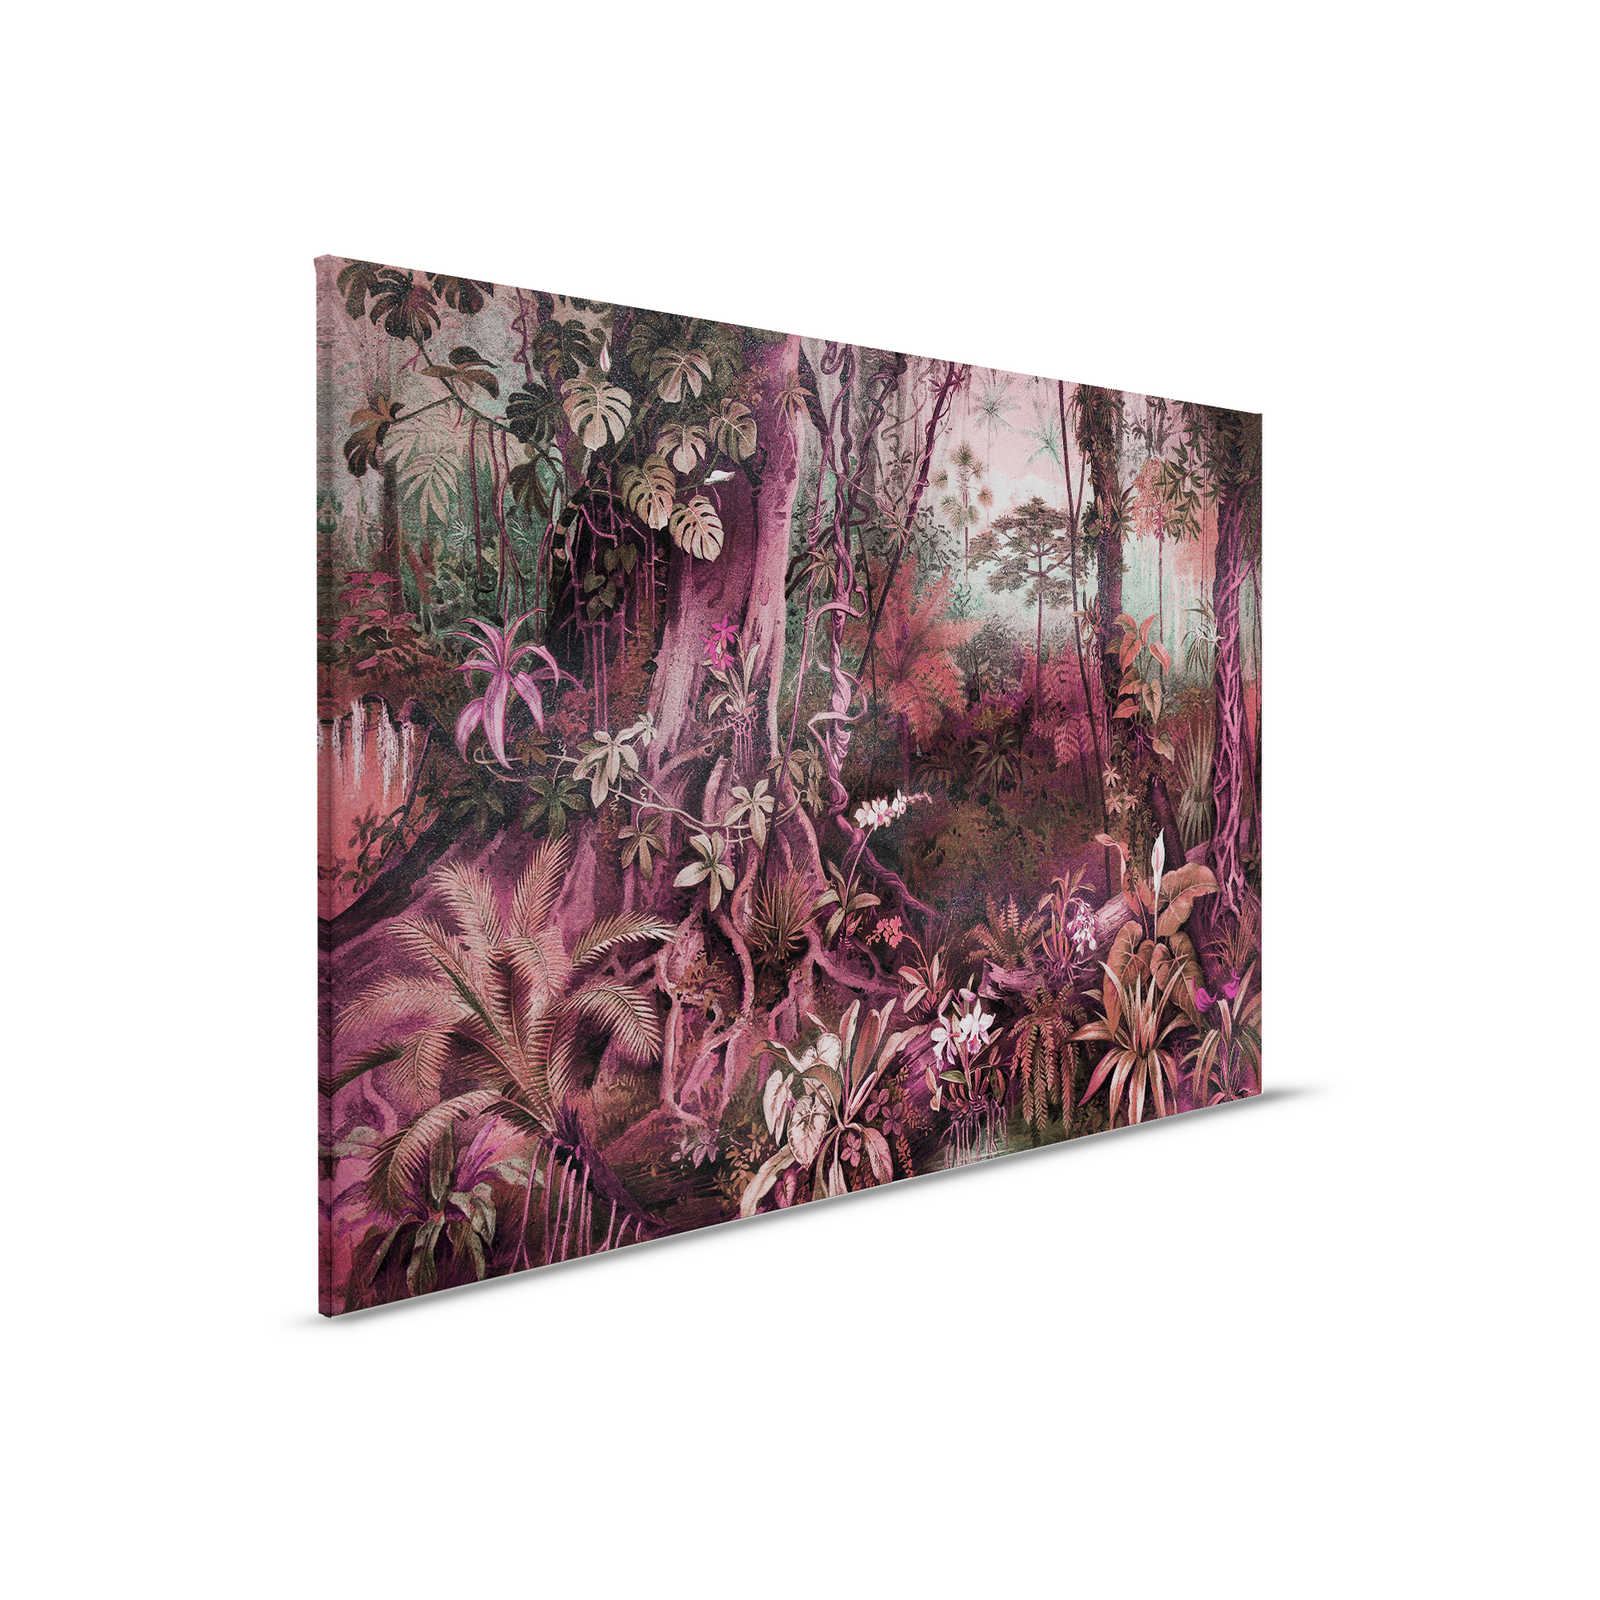 Jungle canvas picture in drawing style | purple, green - 0.90 m x 0.60 m
